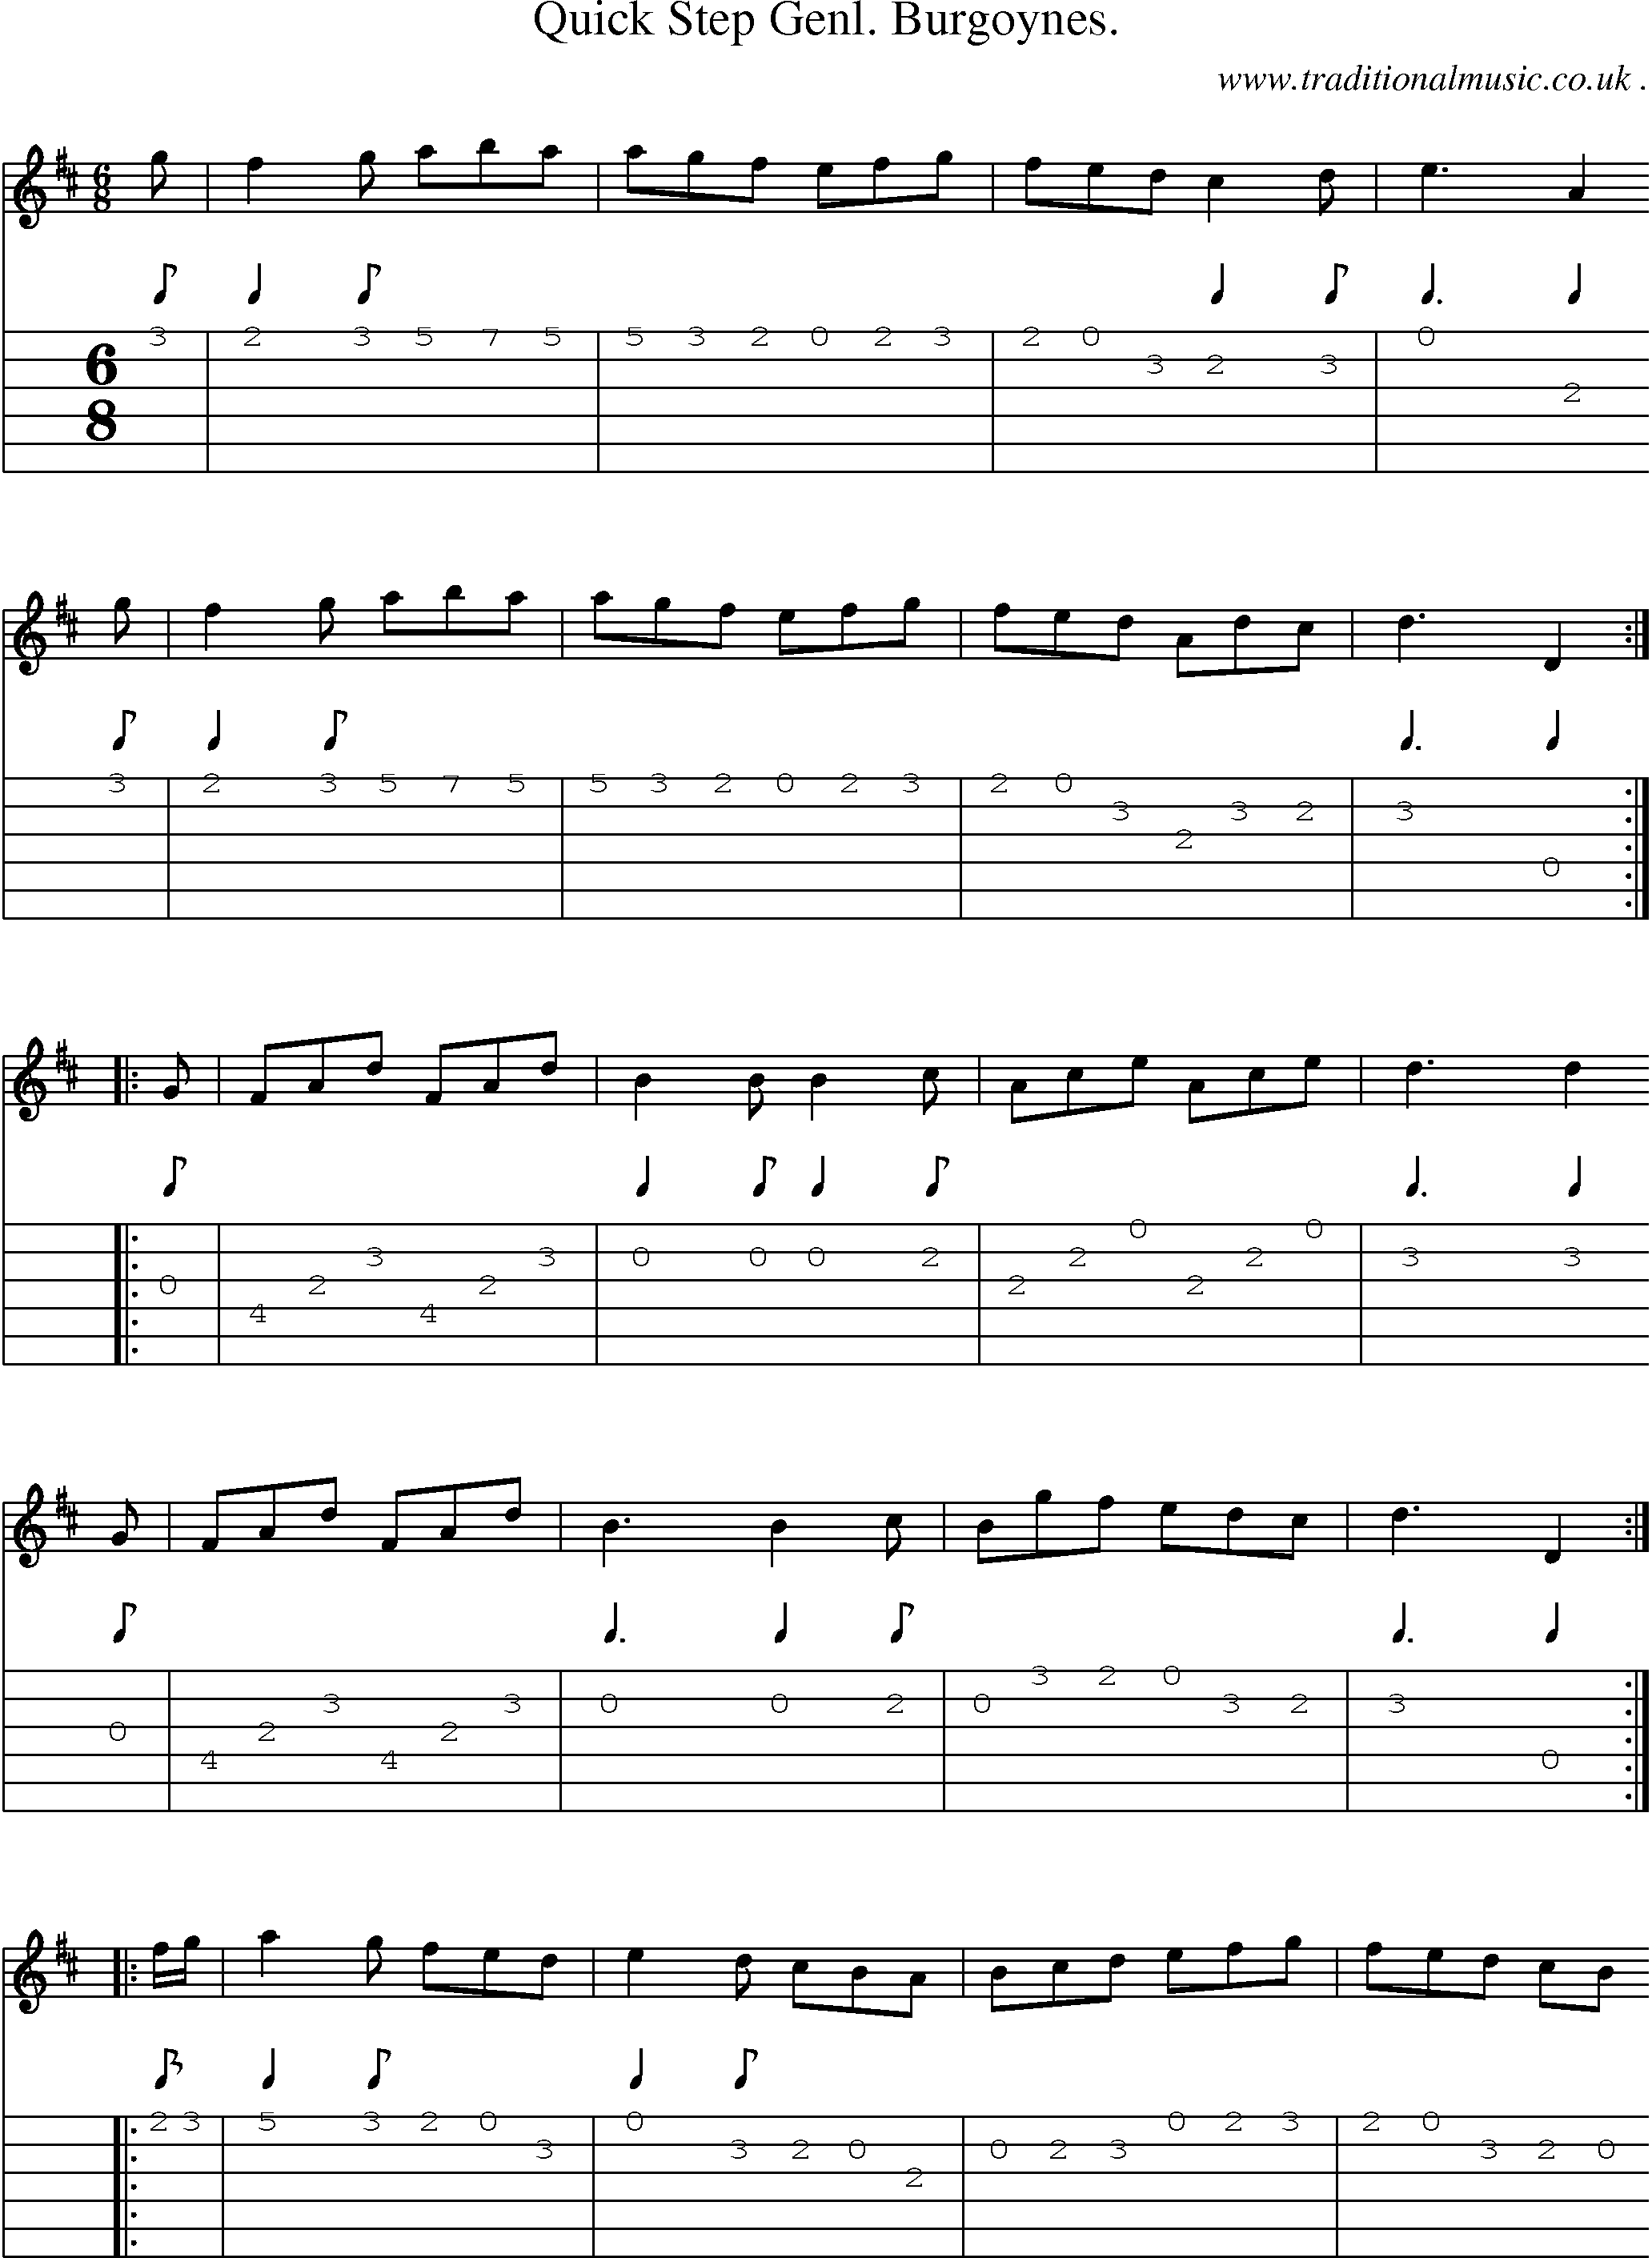 Sheet-music  score, Chords and Guitar Tabs for Quick Step Genl Burgoynes